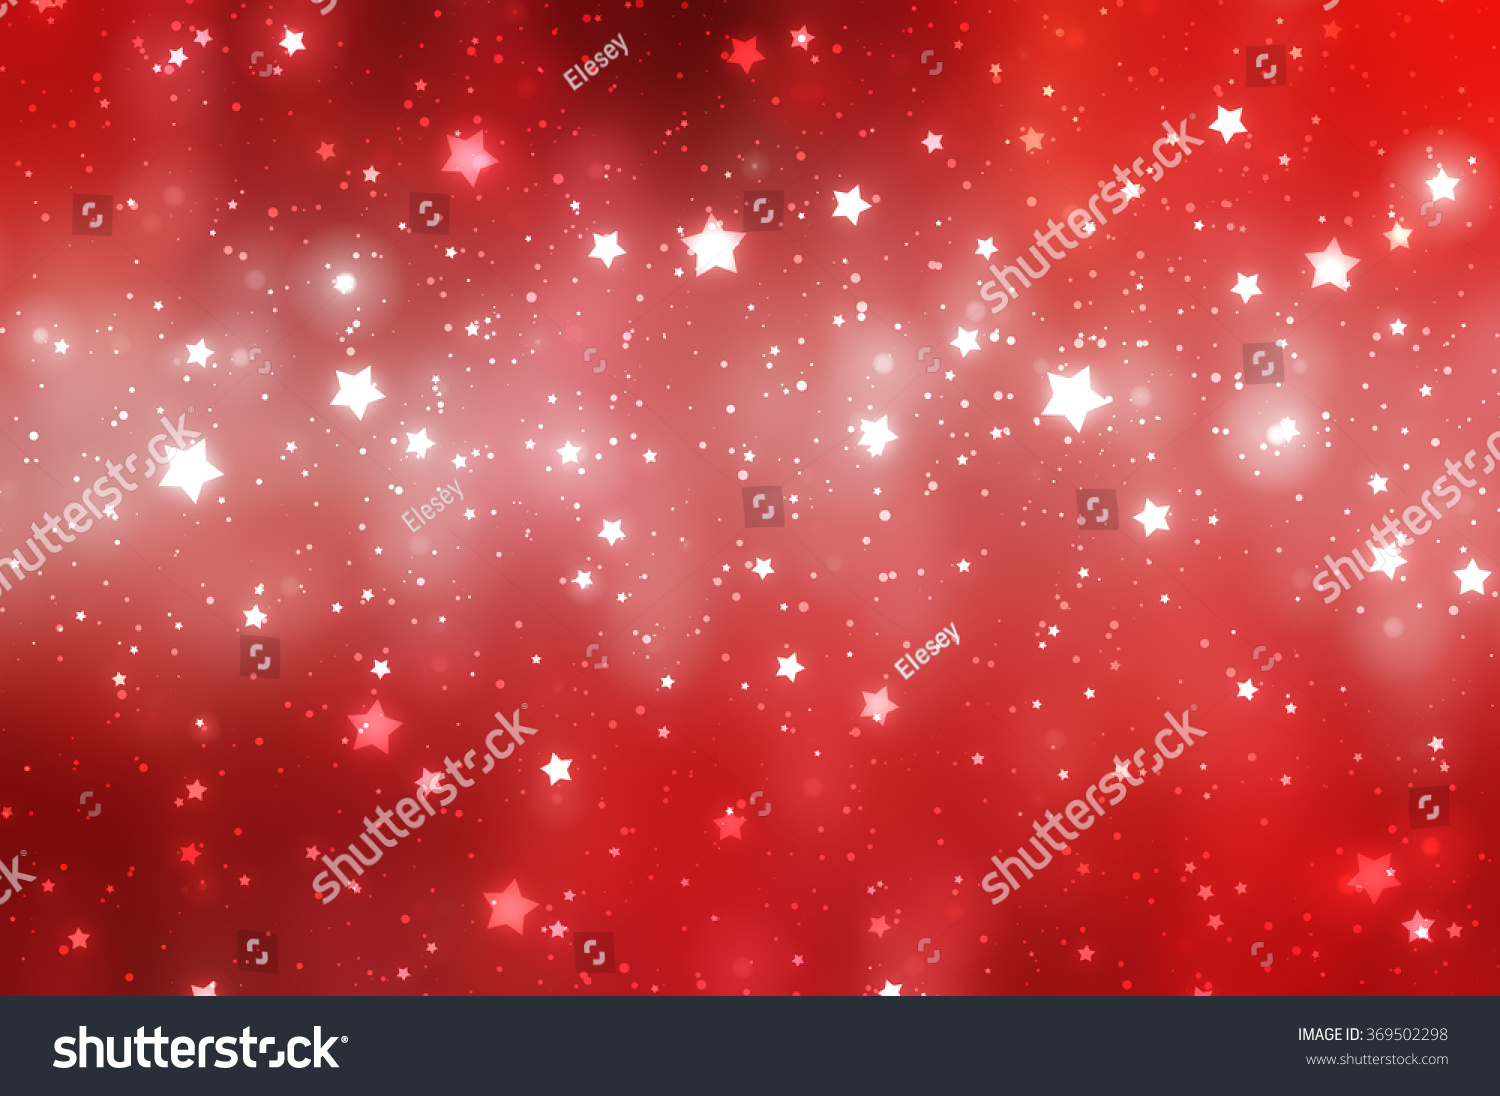 Abstract Shiny Red Background Stock Photo 369502298 : Shutterstock